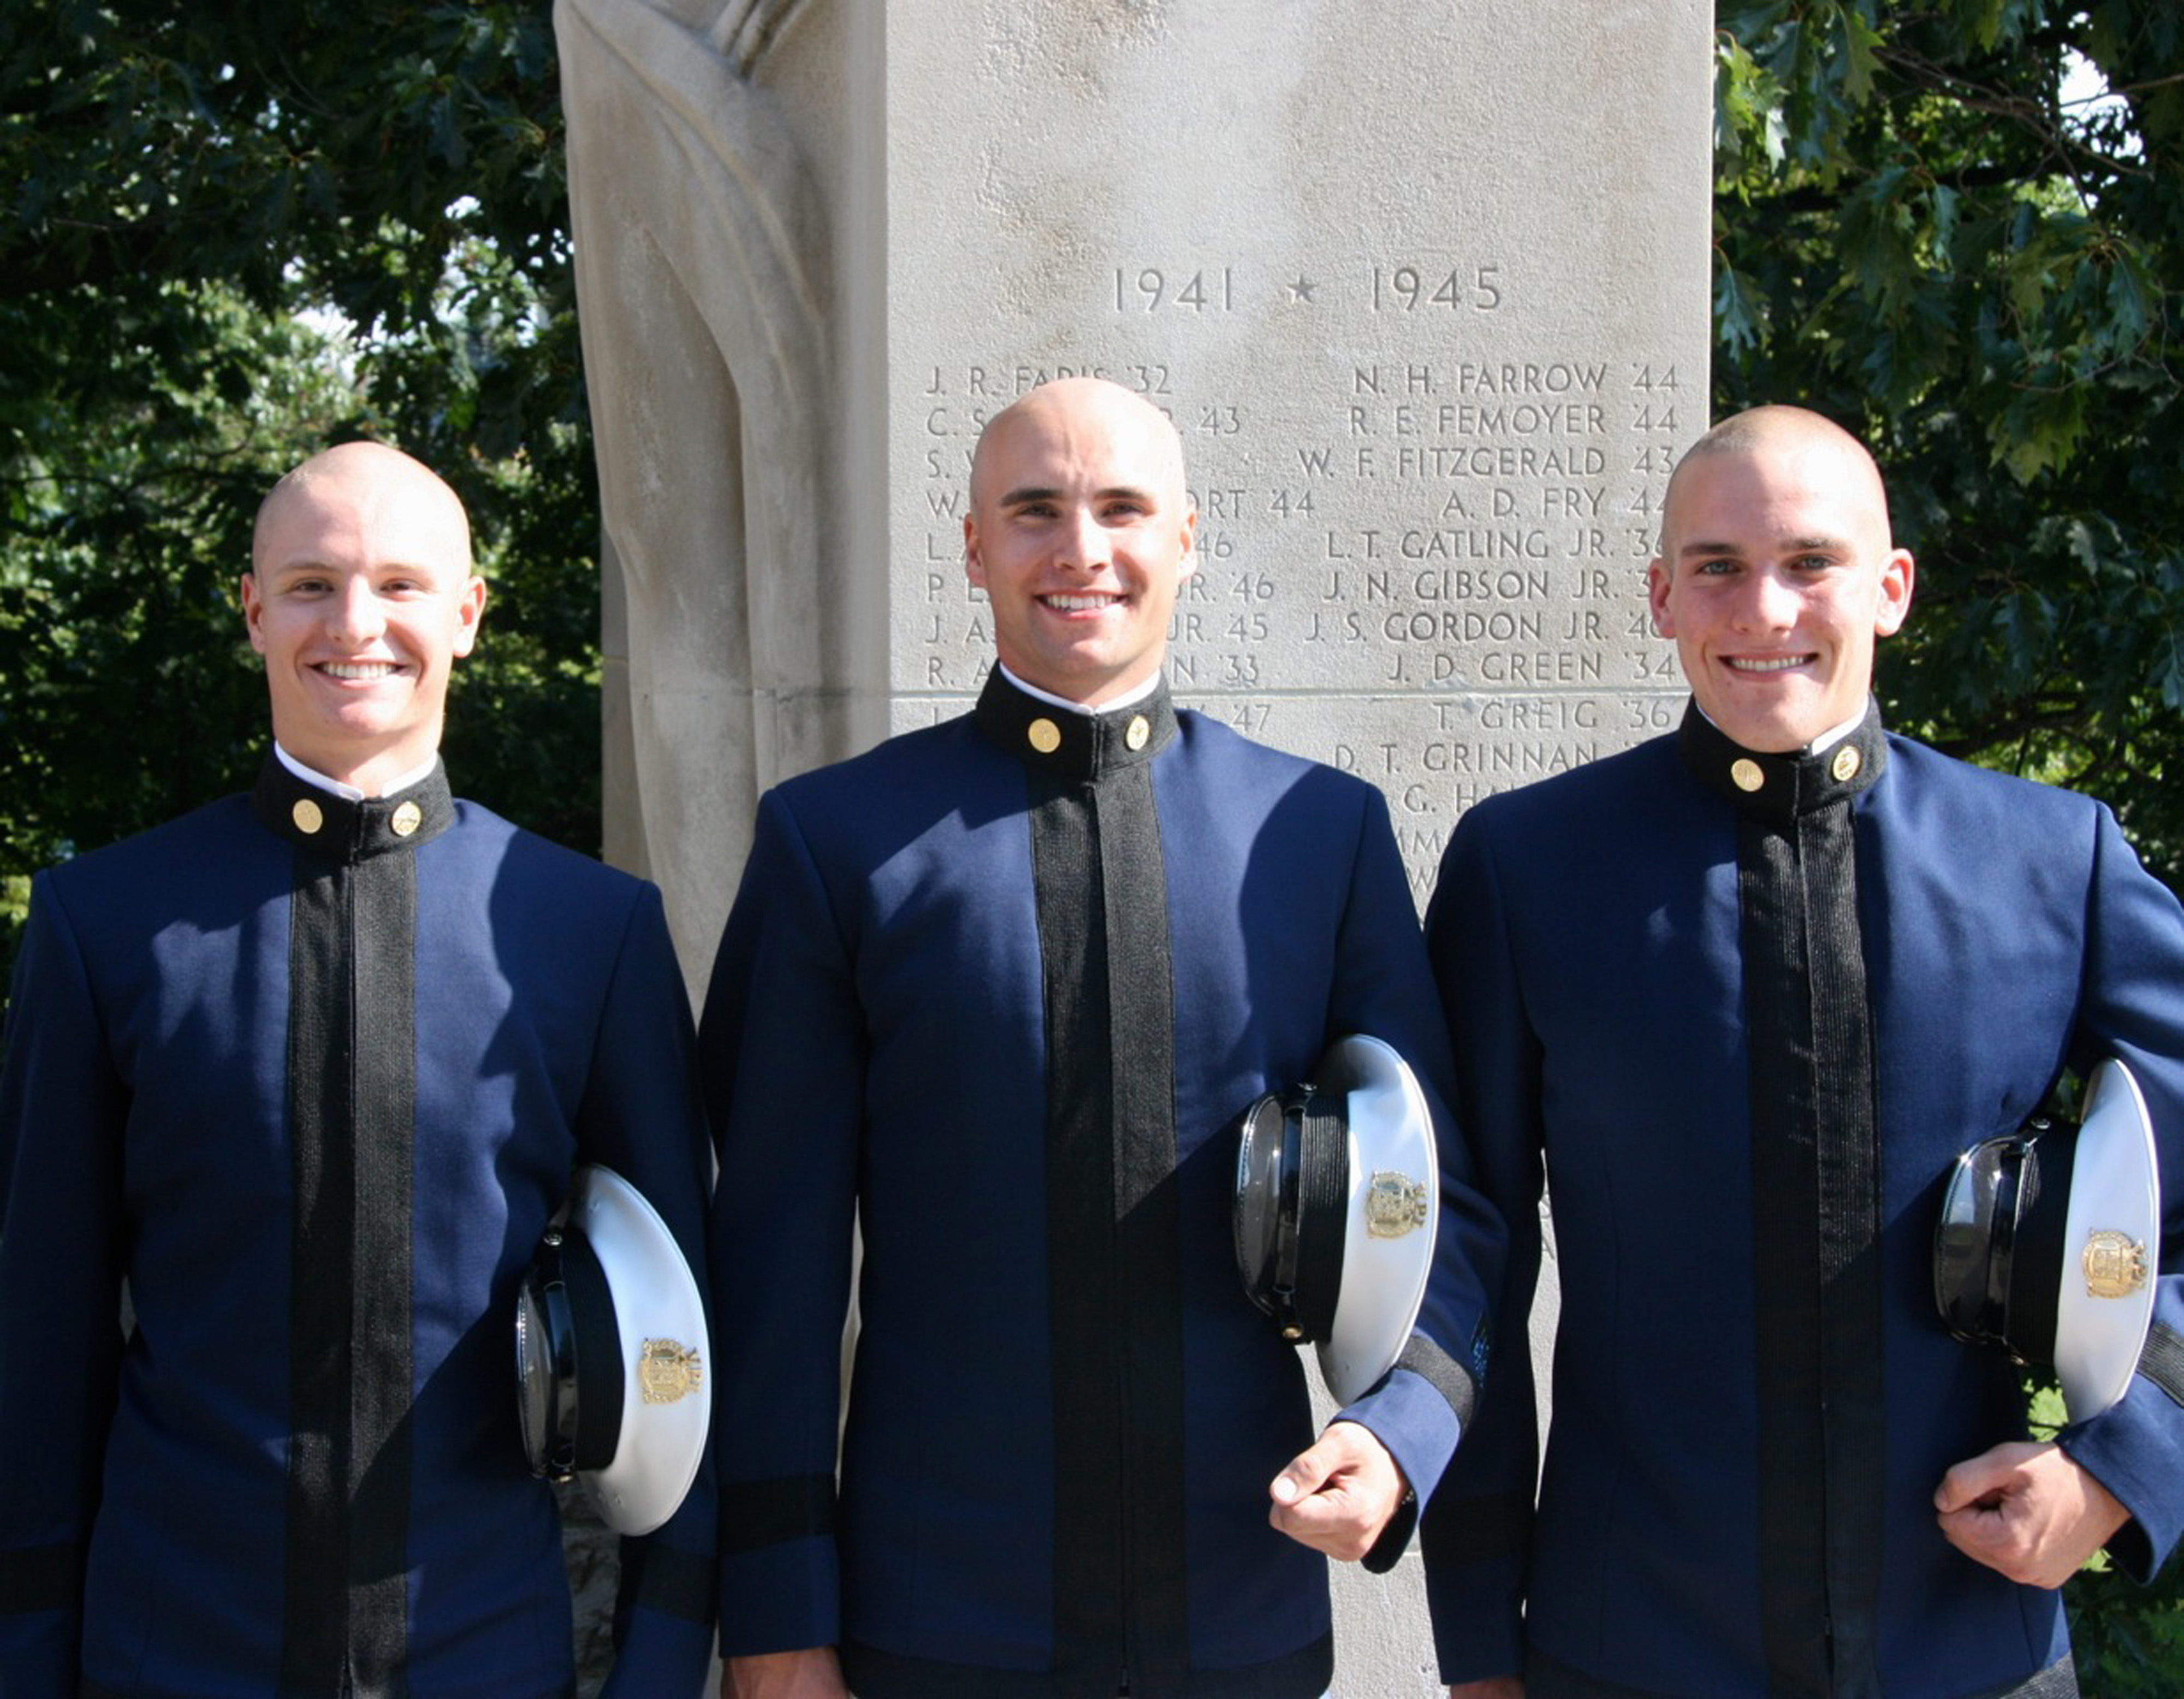 From left to right are Cadets Conor Cosgrove, Ethan Smith, and Shane Wescott